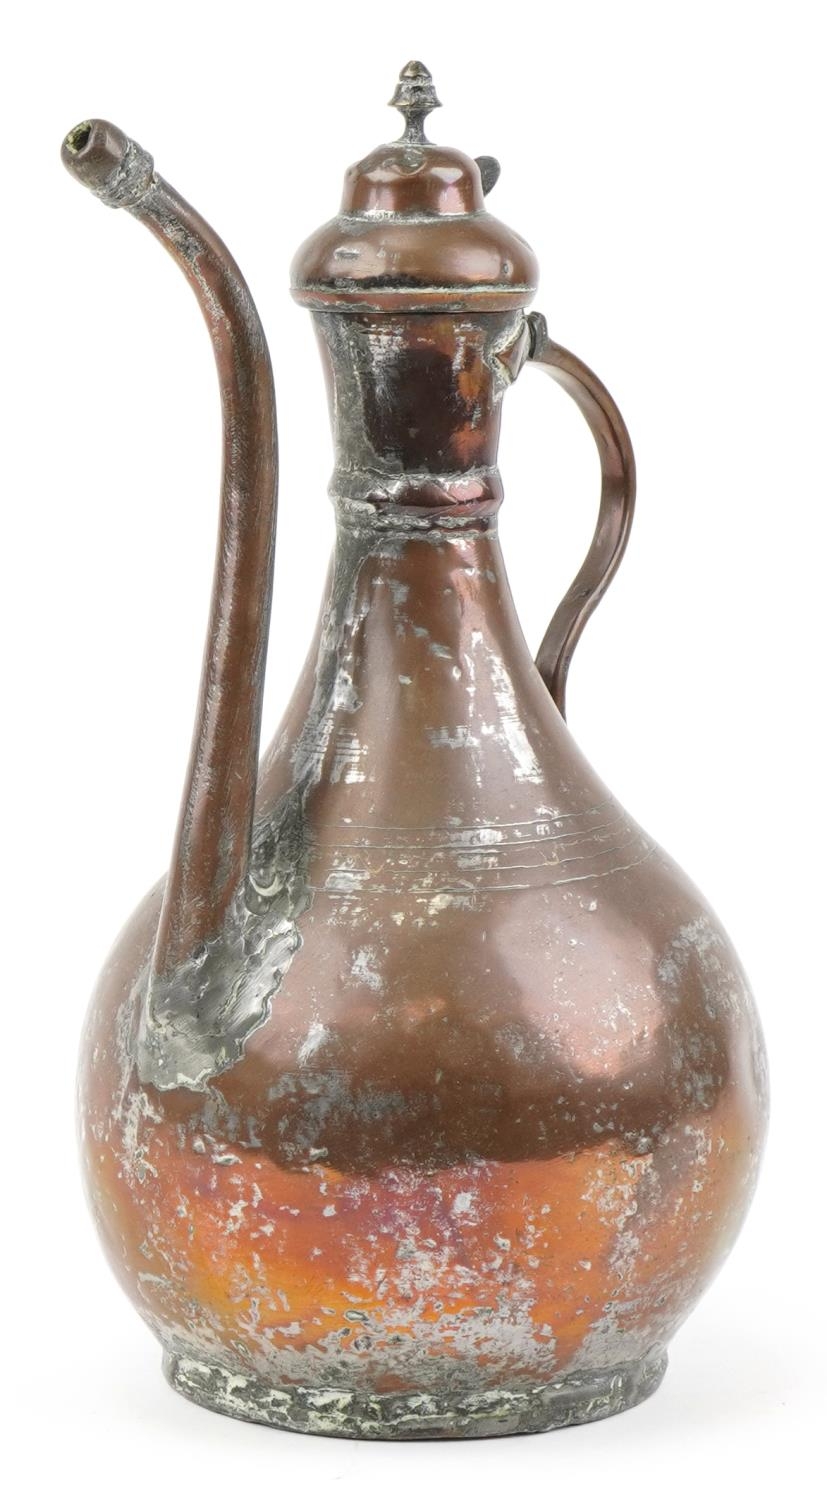 Large middle eastern copper coffee pot, 37cms tall : For further information on this lot please